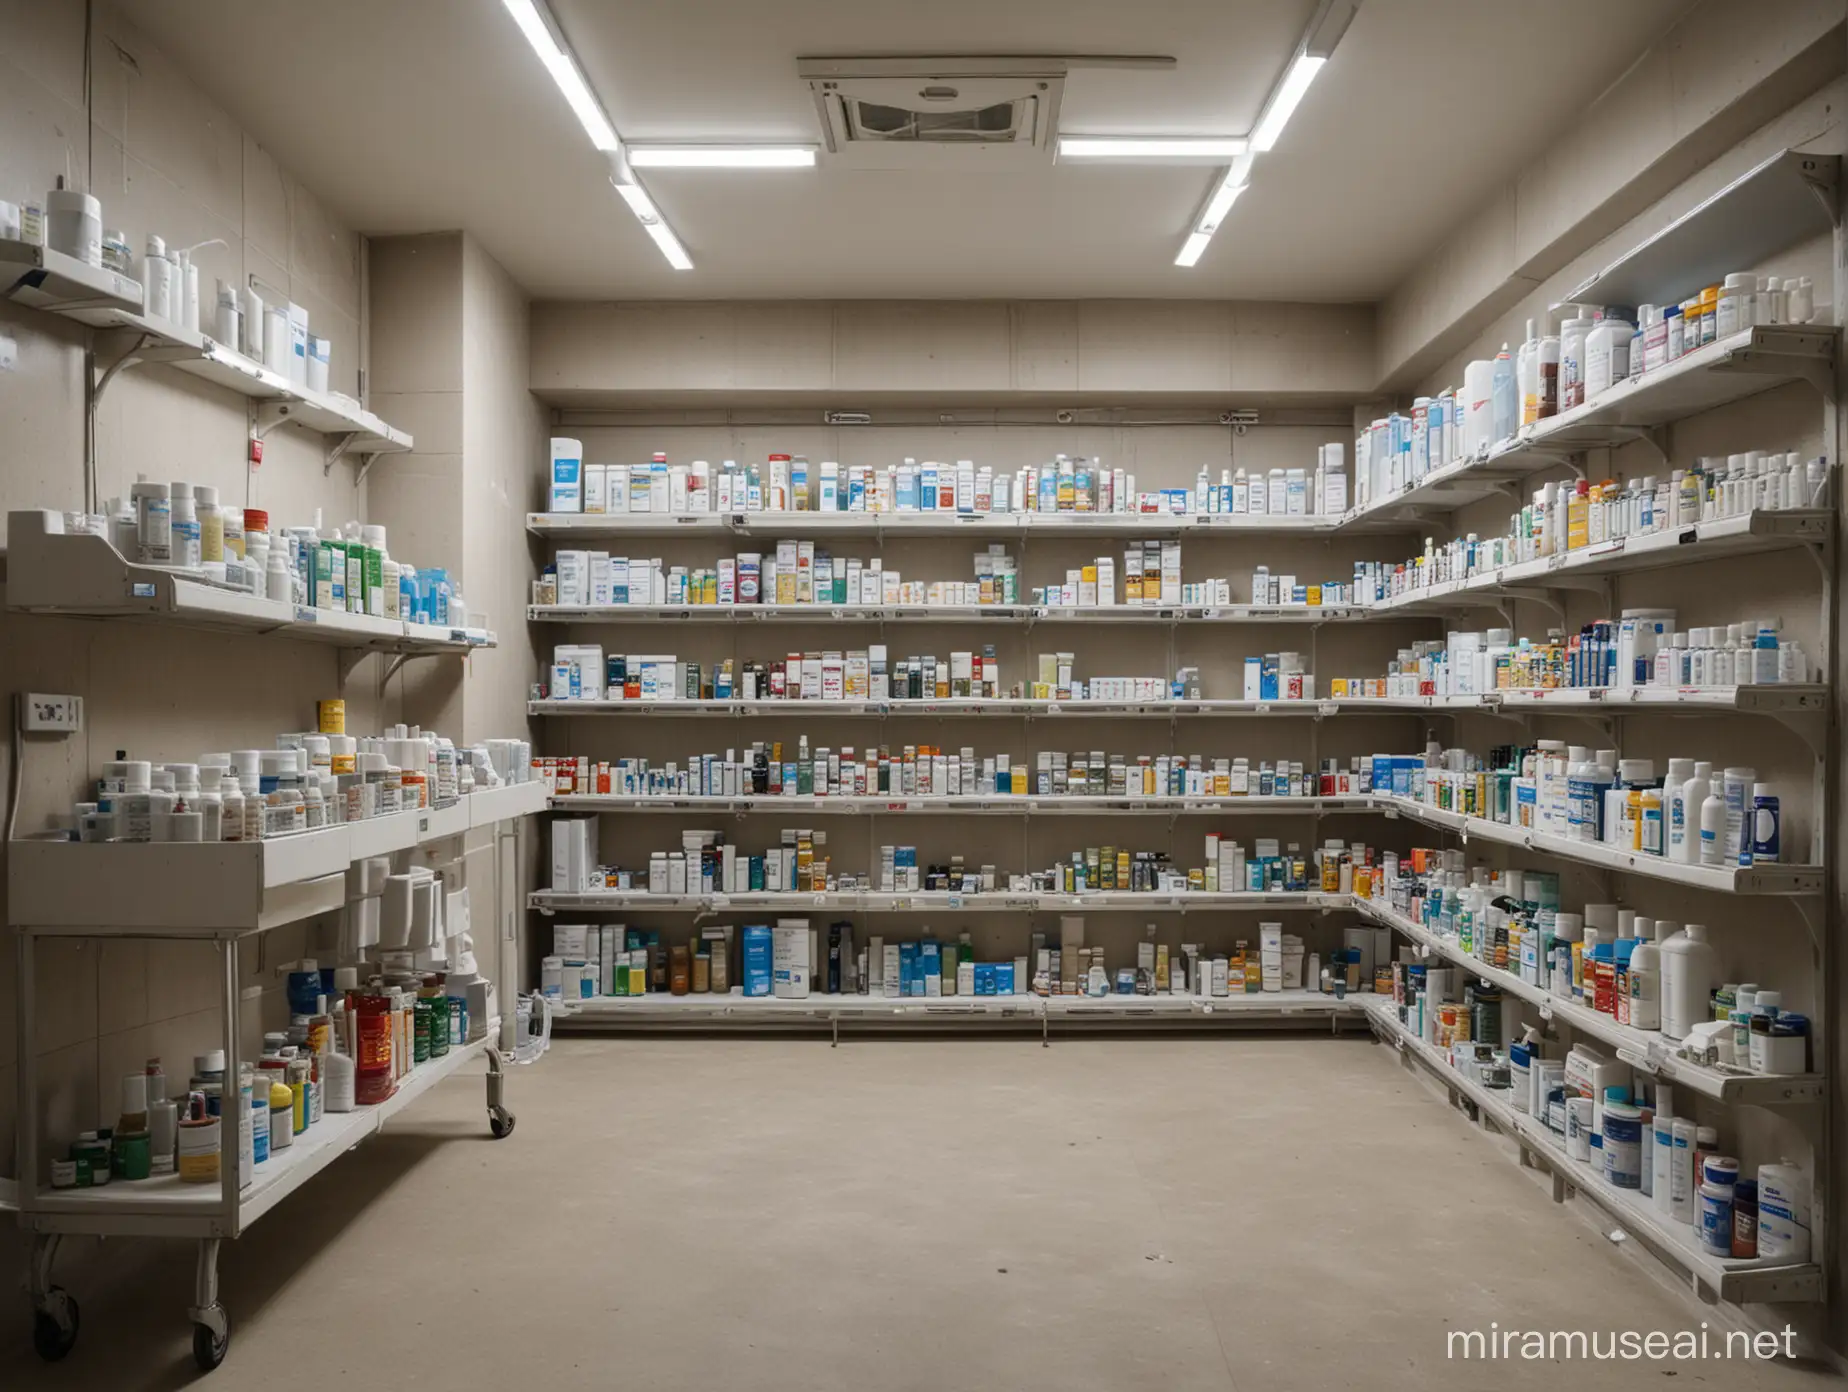 Elite Pharmaceutical Pharmacy in Bunker with Diverse Medicines and Hospital Beds